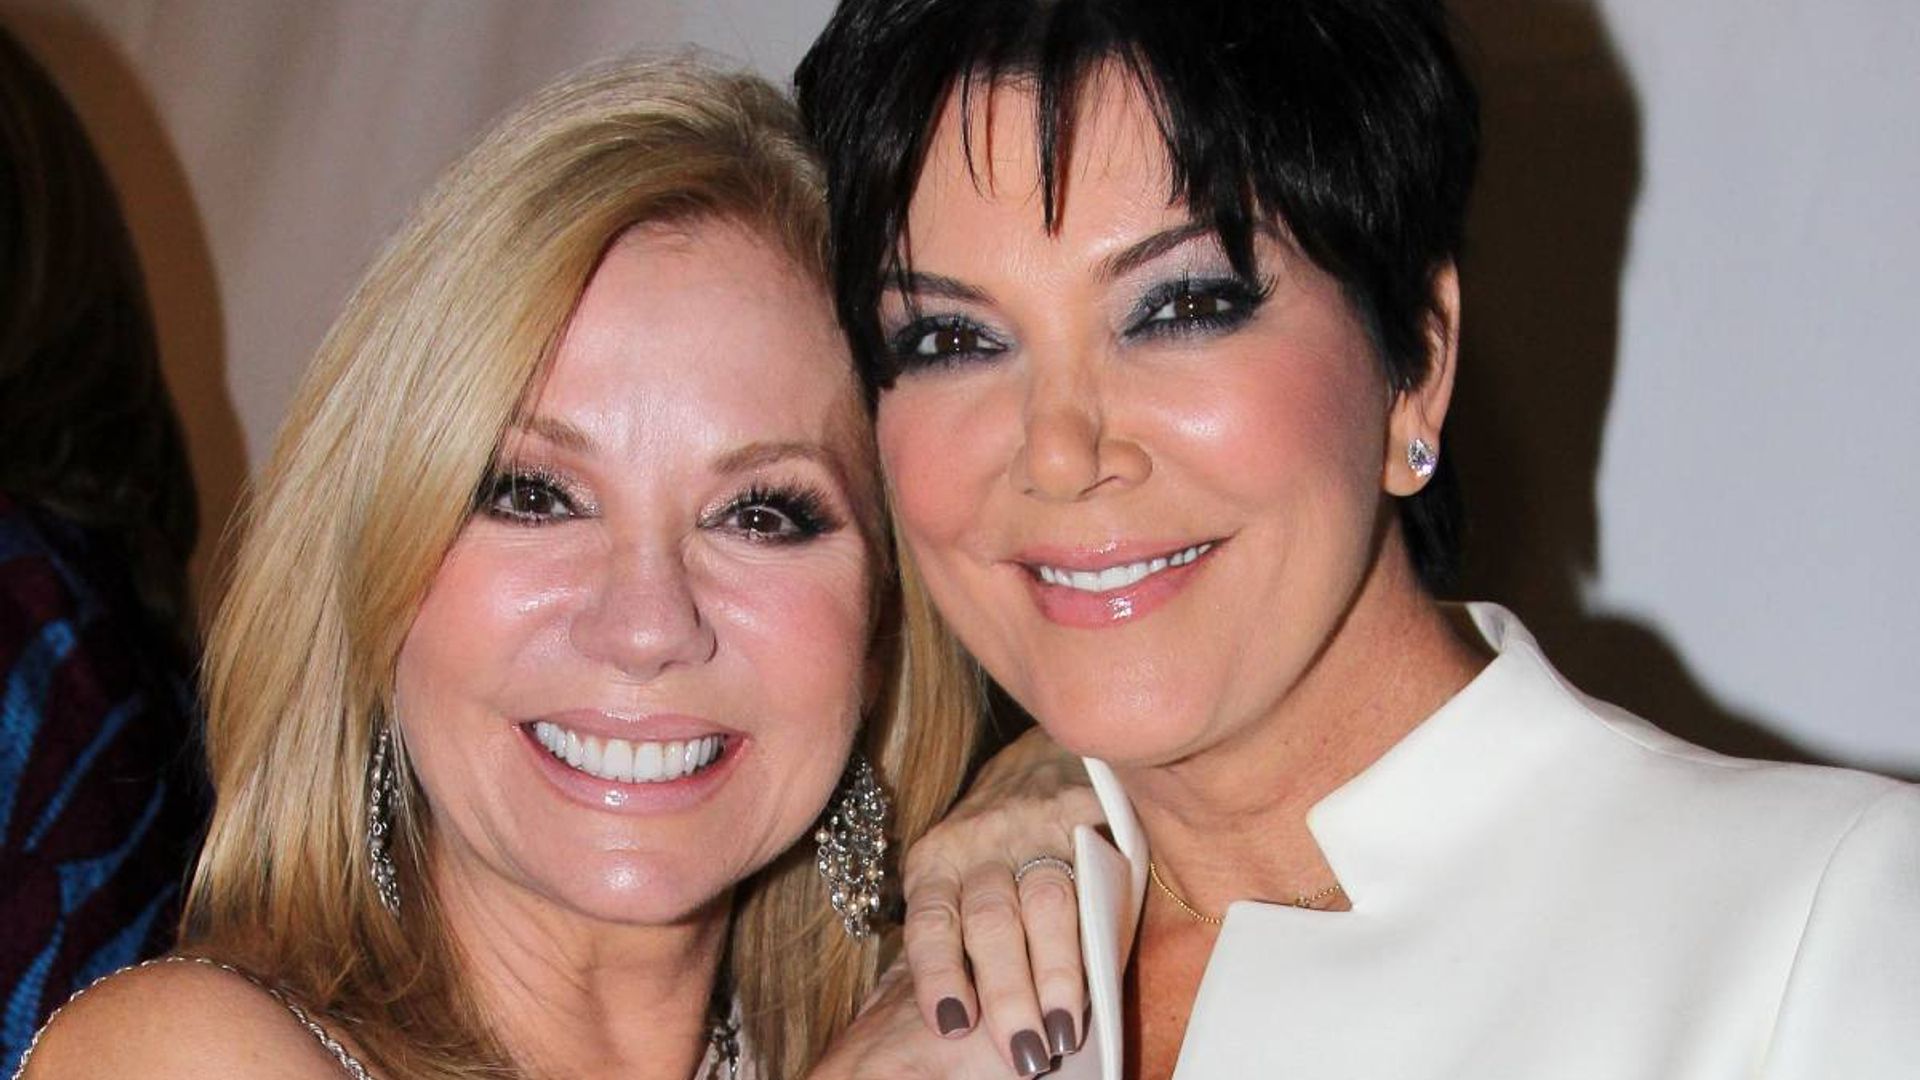 Kris Jenner shows support for Kathie Lee Gifford following Regis Philbin's death